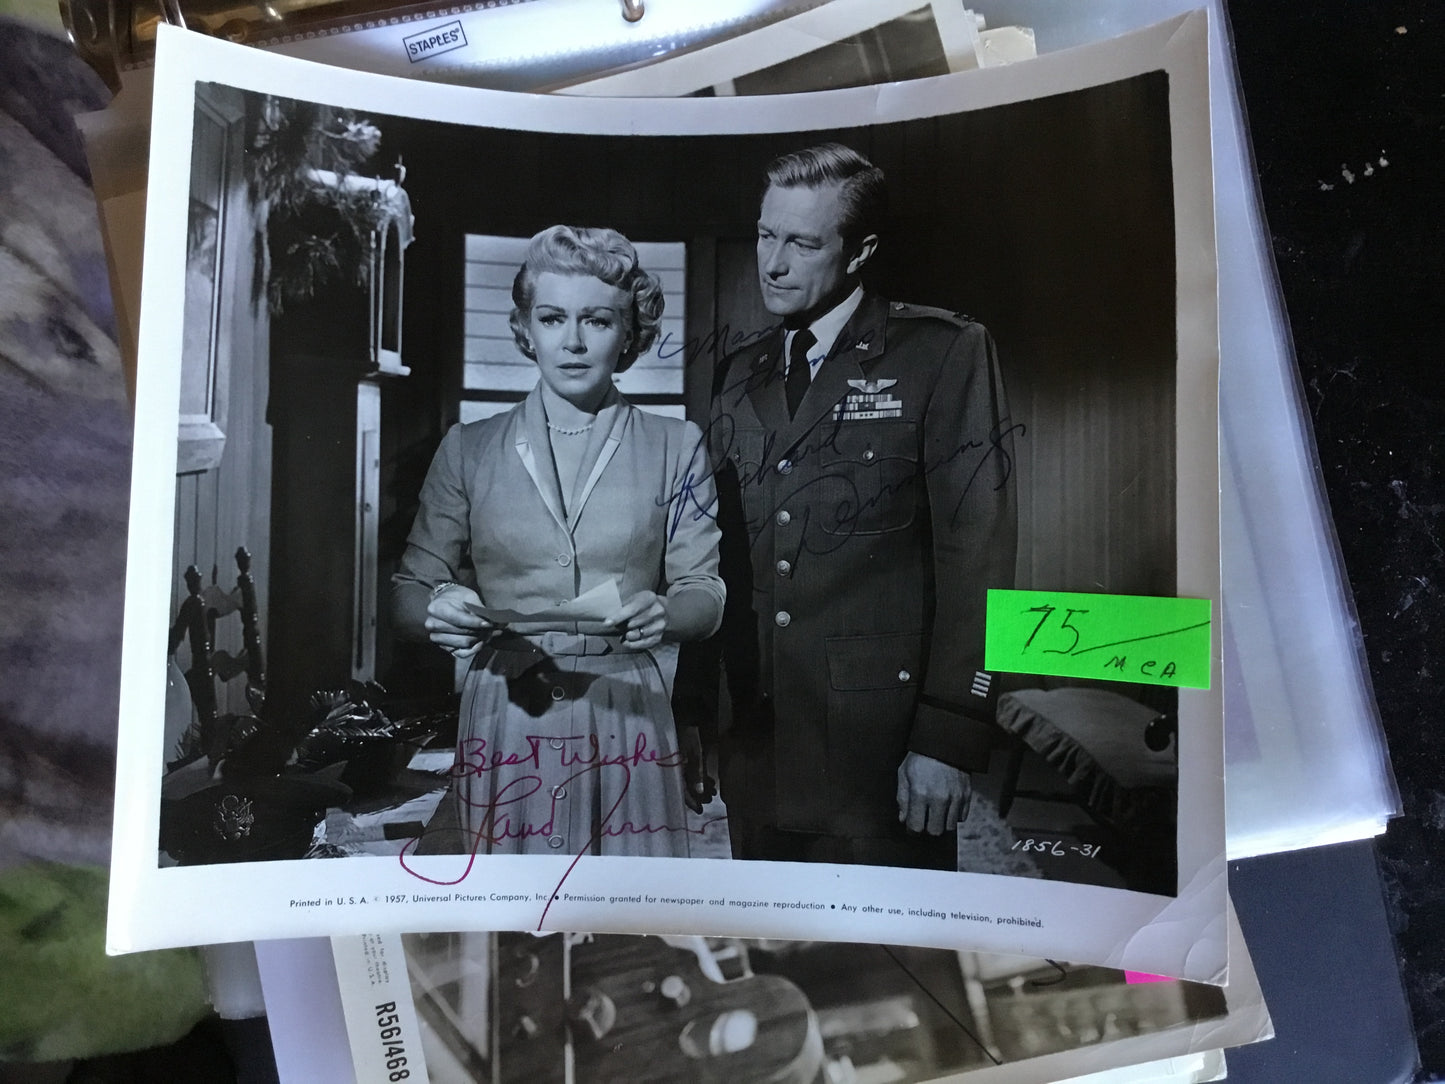 Lana Turner and Richard Denning, THE LADY TAKES A FLYER, autographs